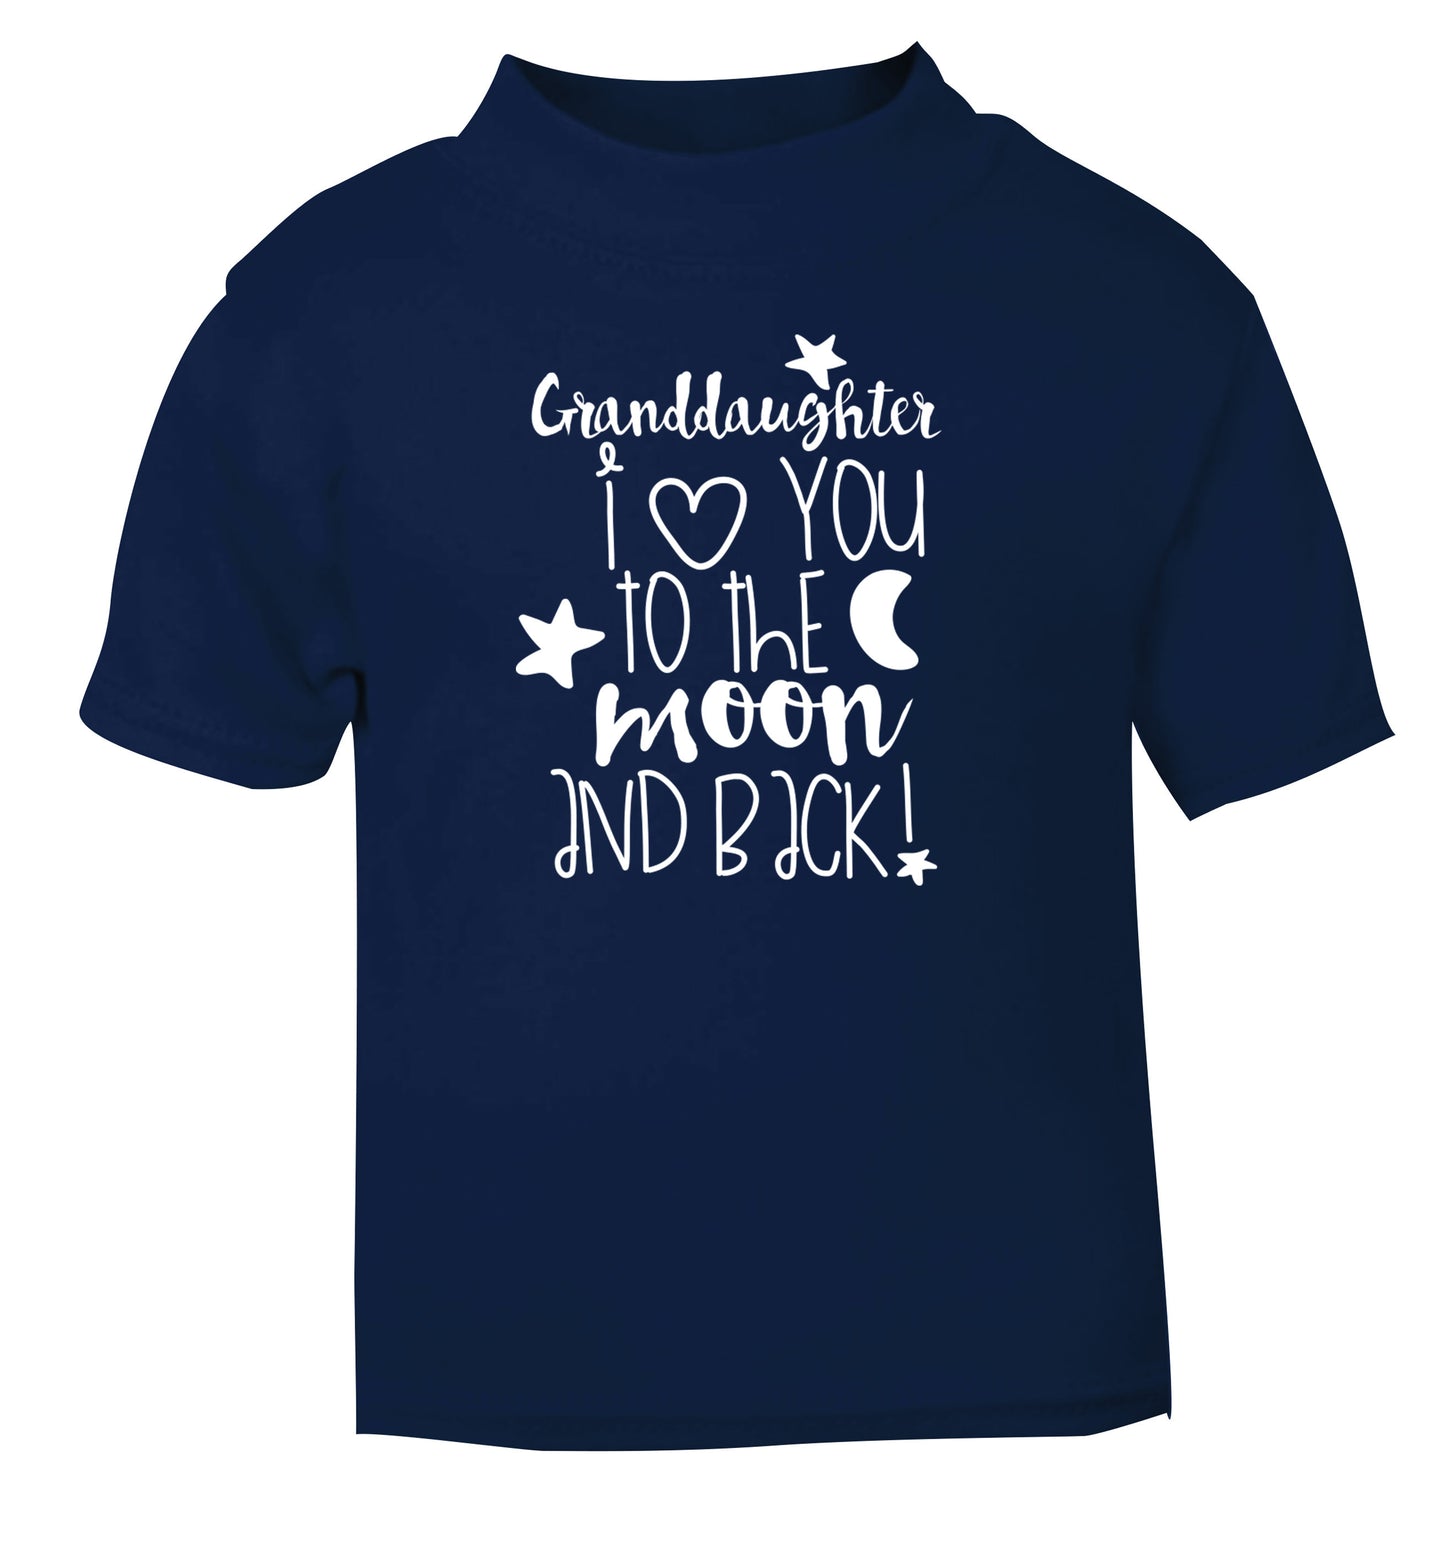 Granddaughter I love you to the moon and back navy Baby Toddler Tshirt 2 Years